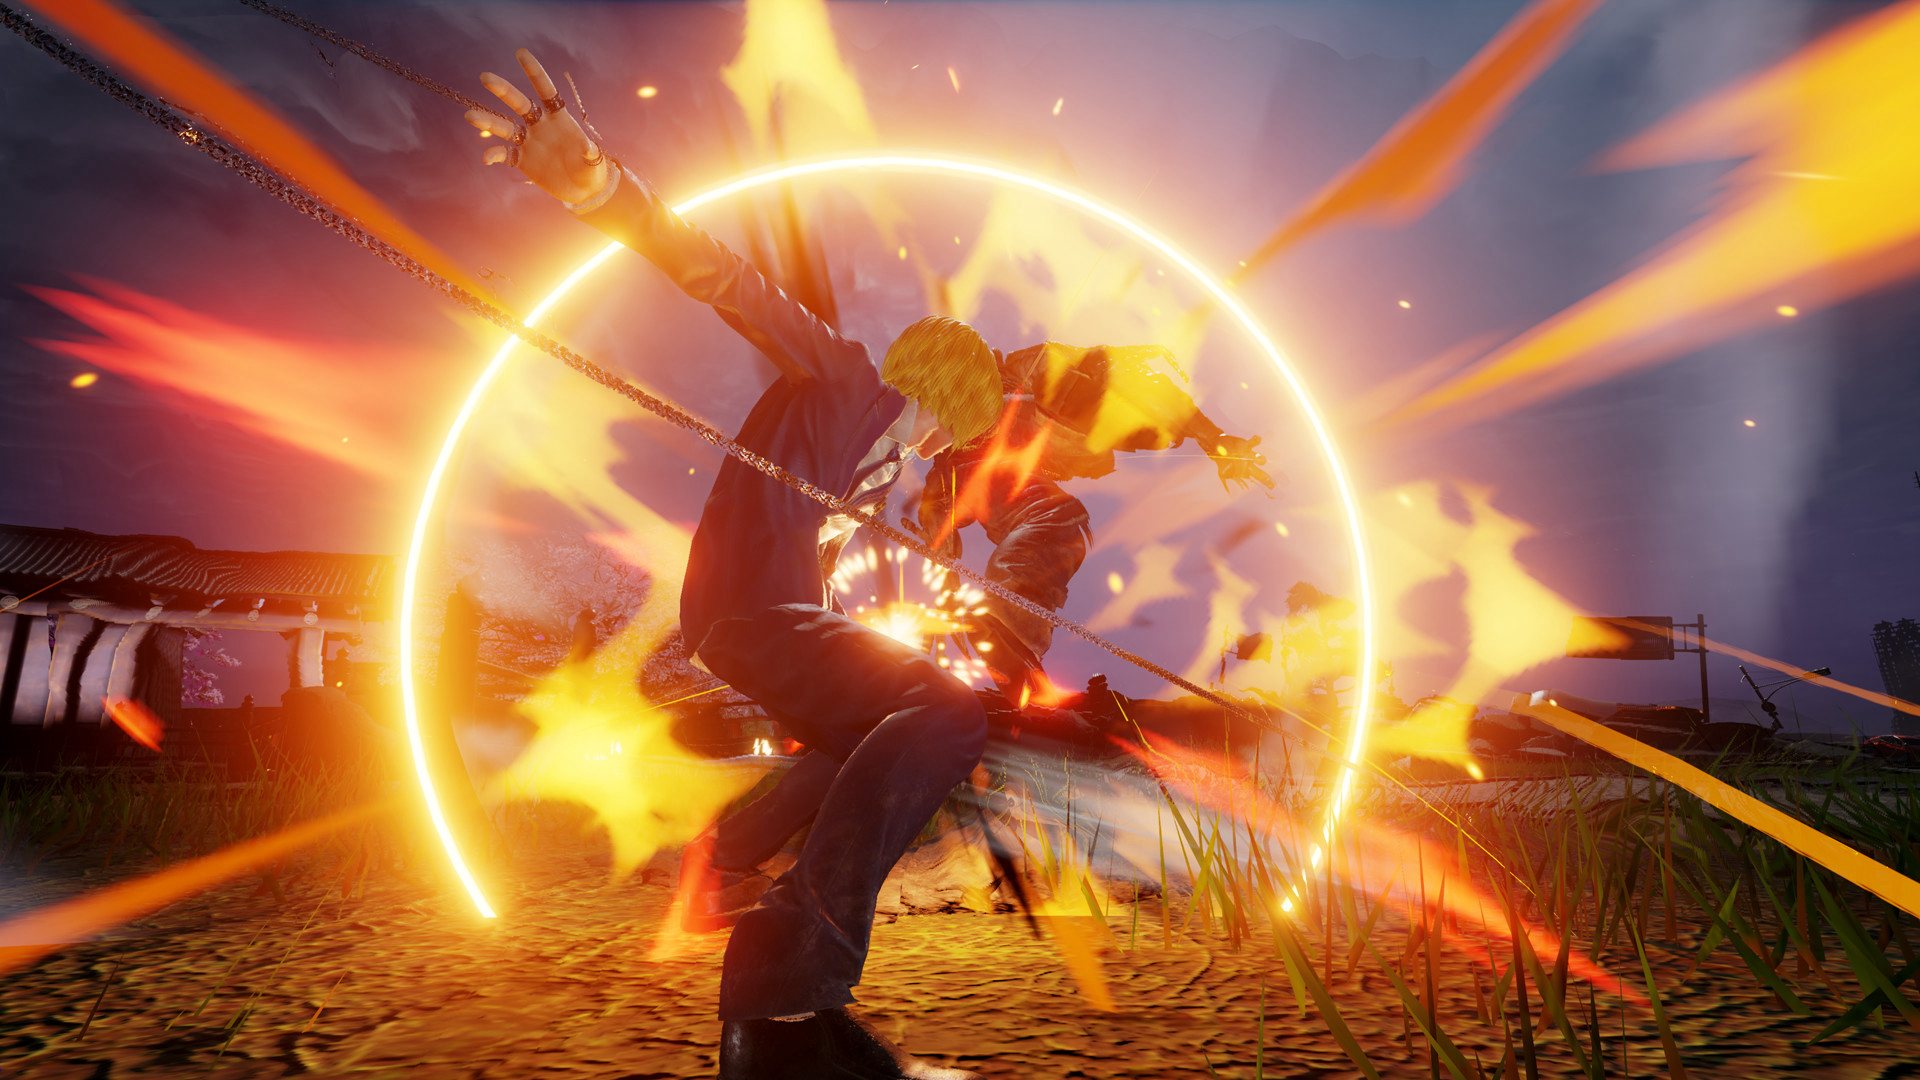 JUMP FORCE PlayStation 4 Account pixelpuffin.net Activation Link 22.59 usd